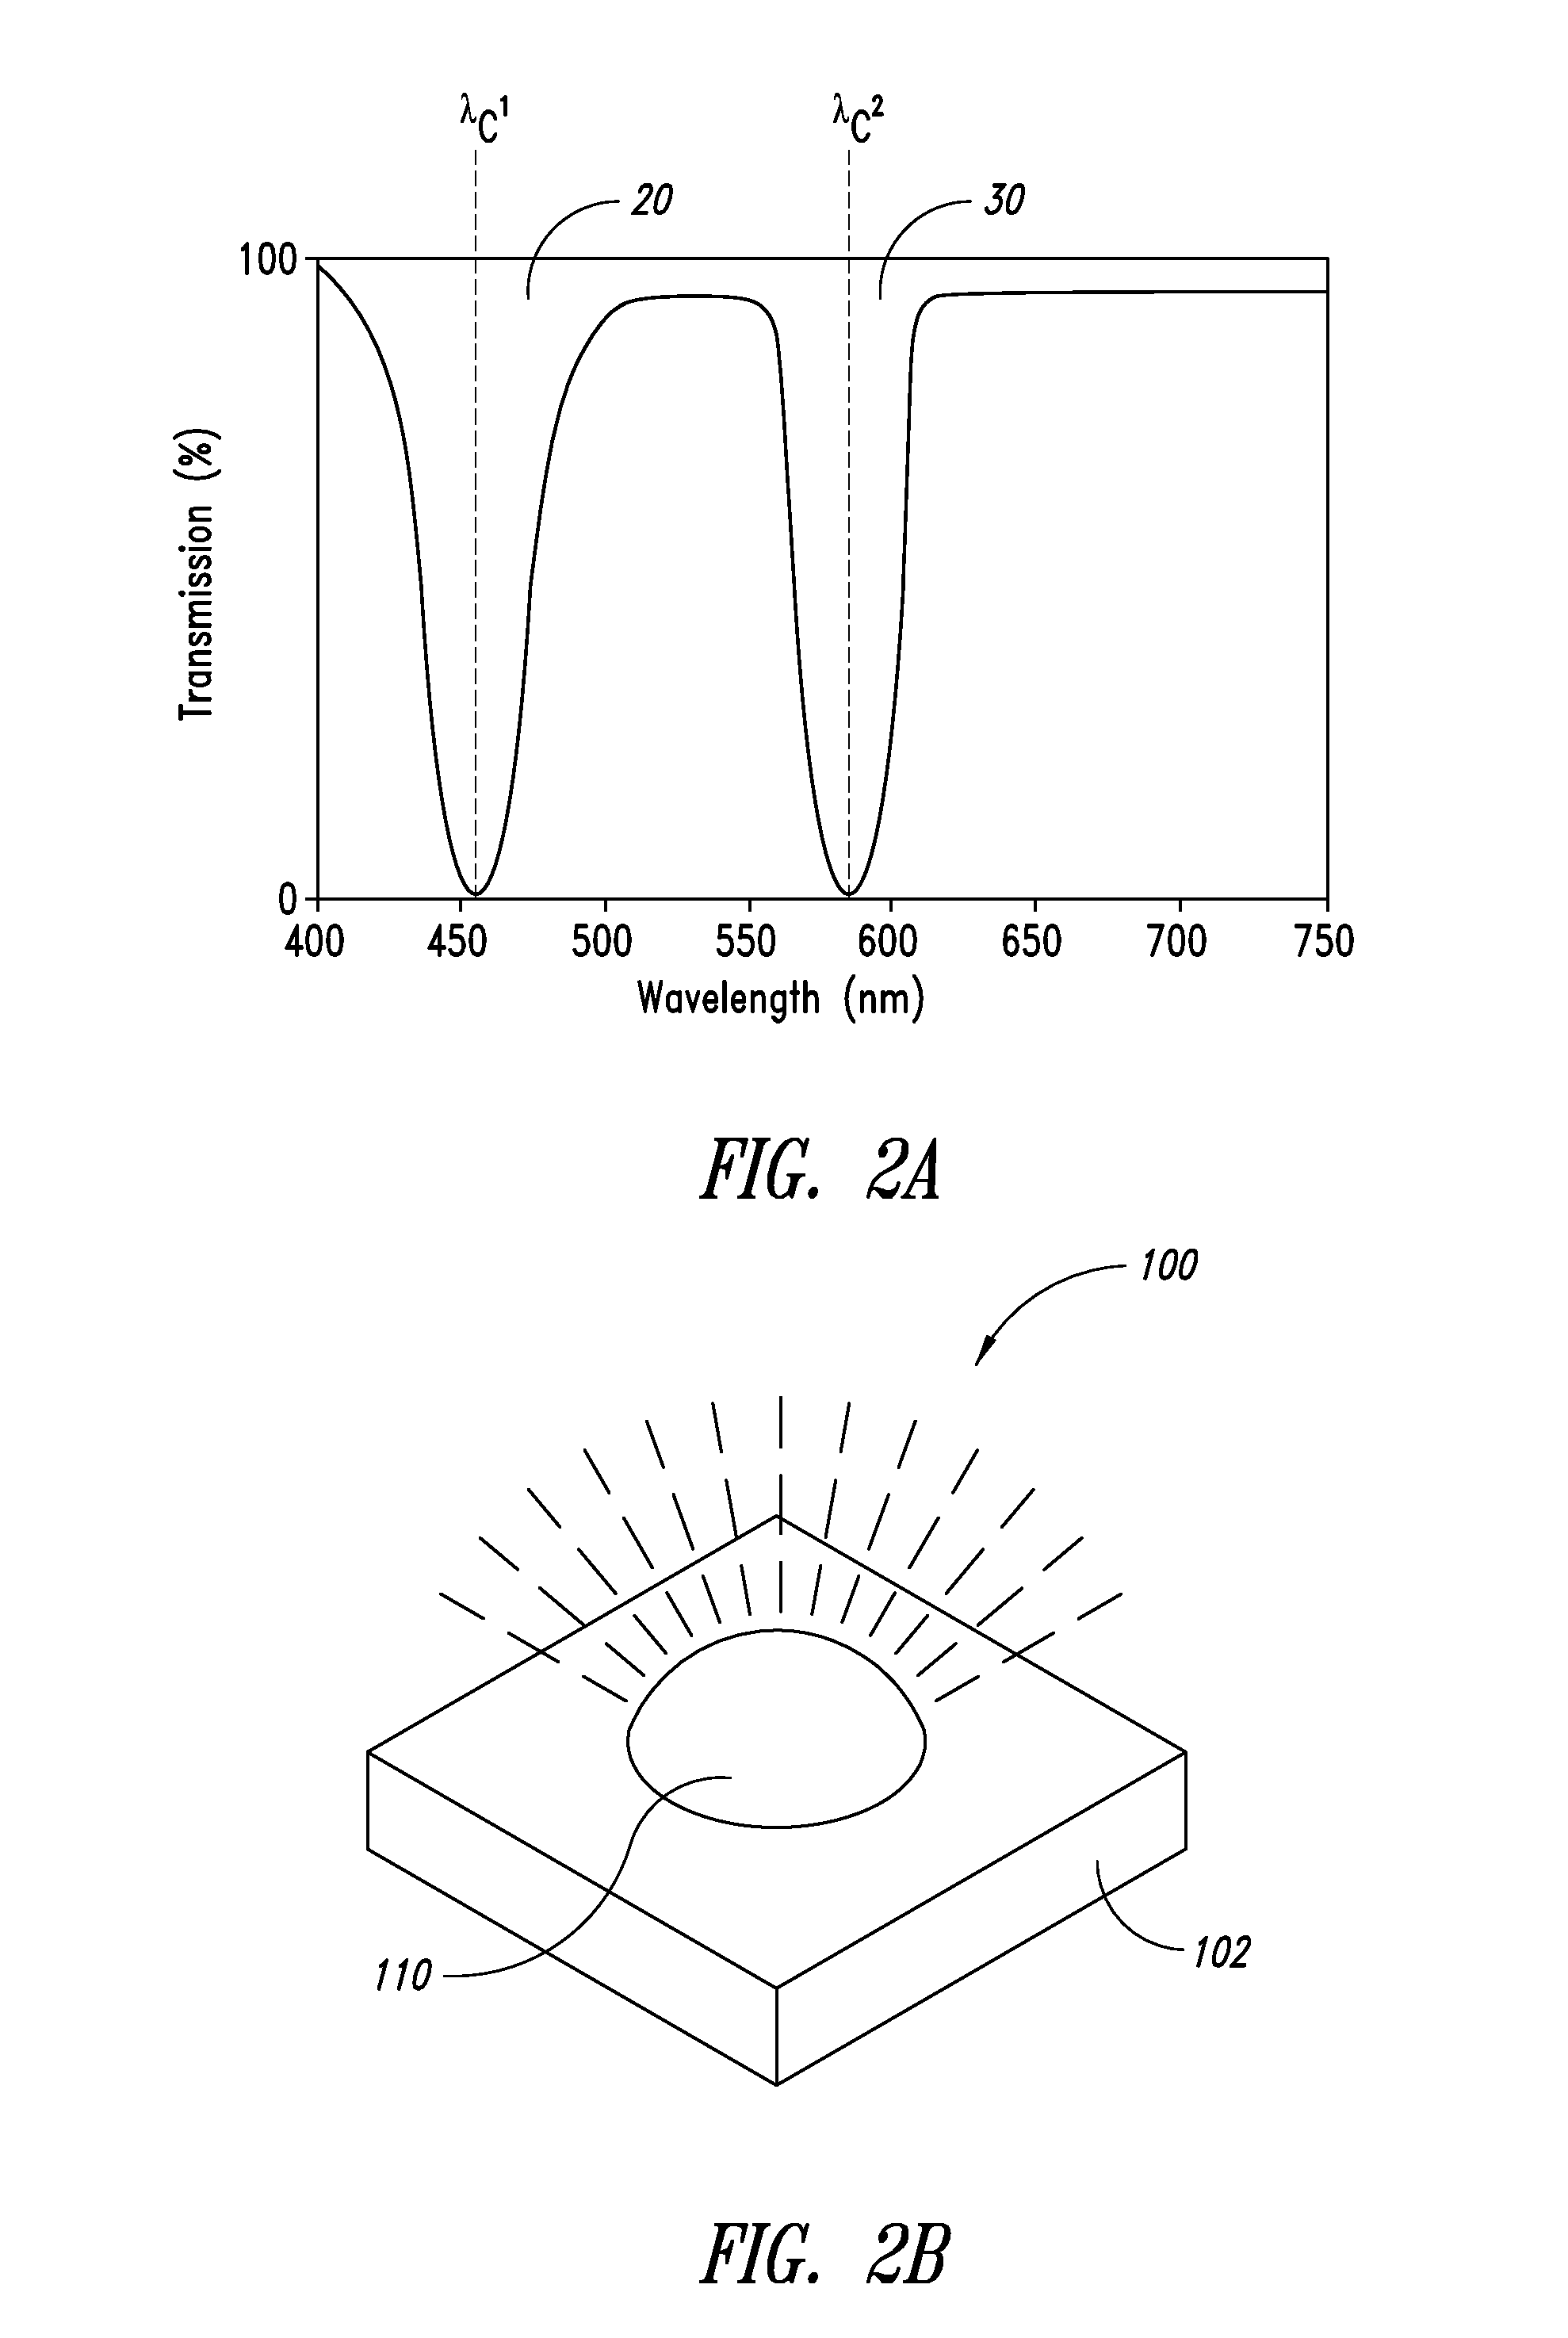 Apparatus, method to enhance color contrast in phosphor-based solid state lights